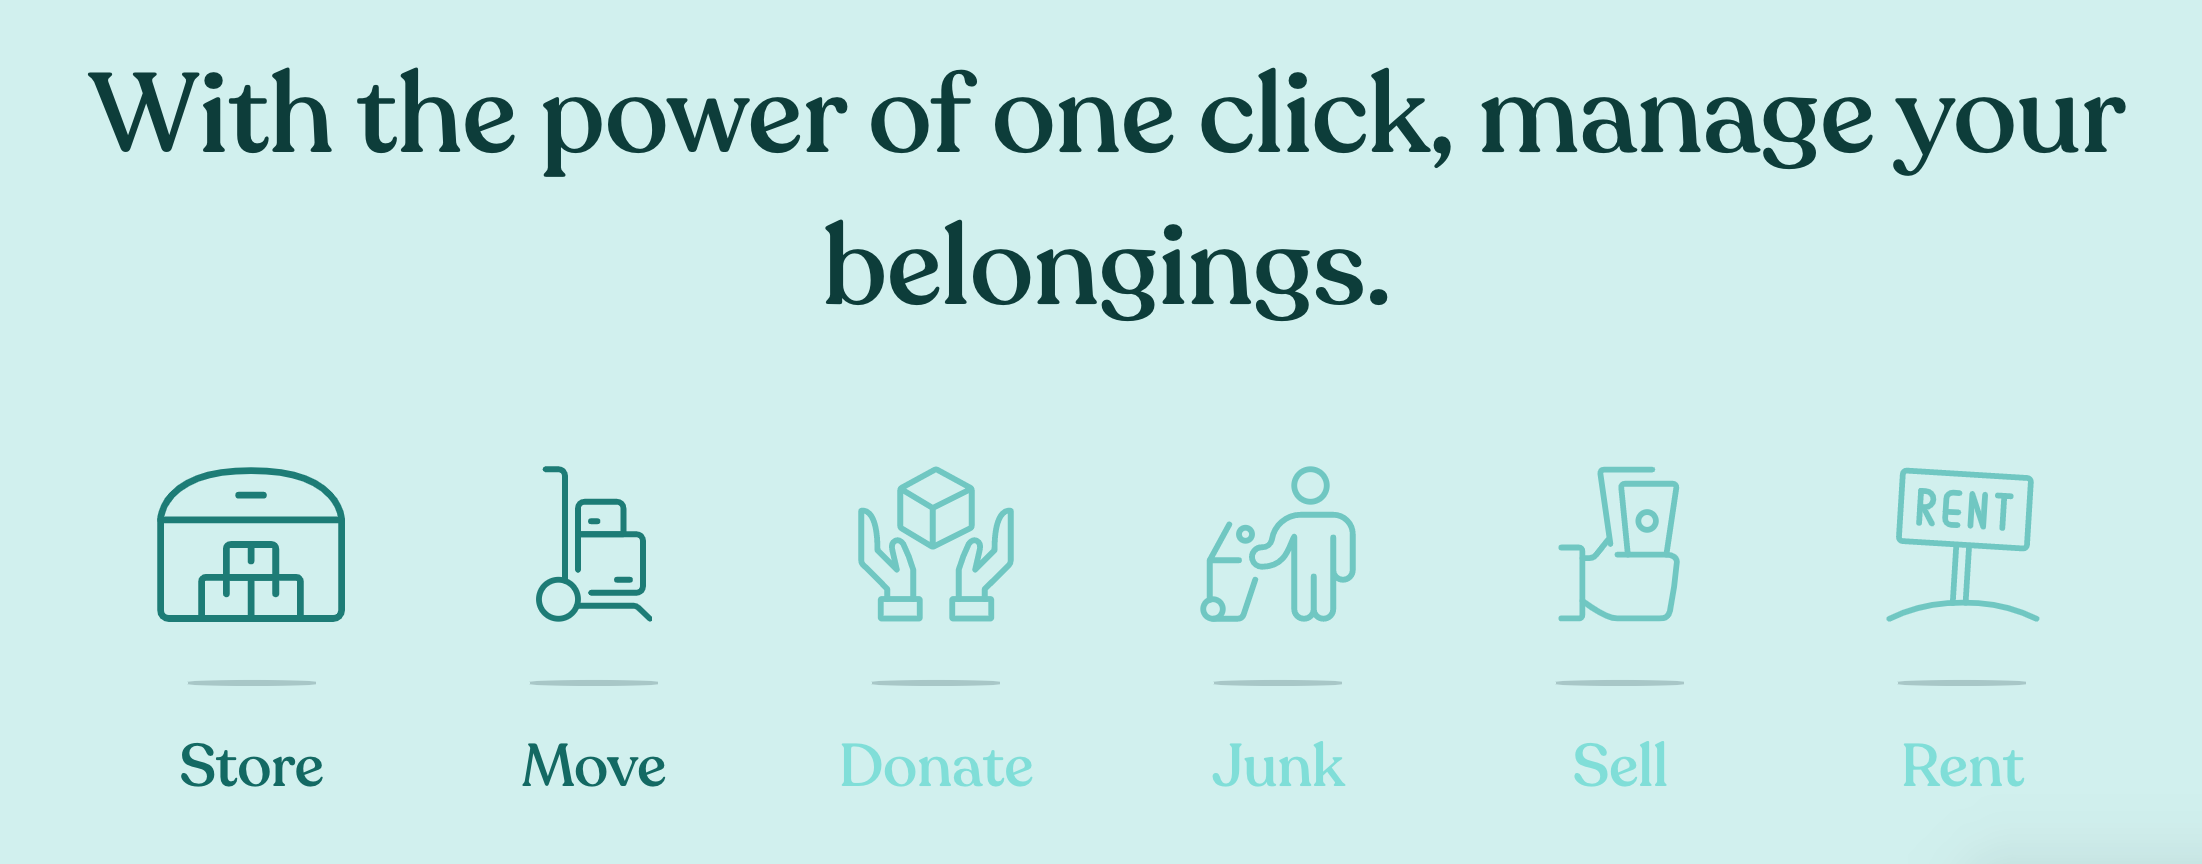 Listing w/icons of services offered by Clutter (store, move, donate, junk, sell, rent)